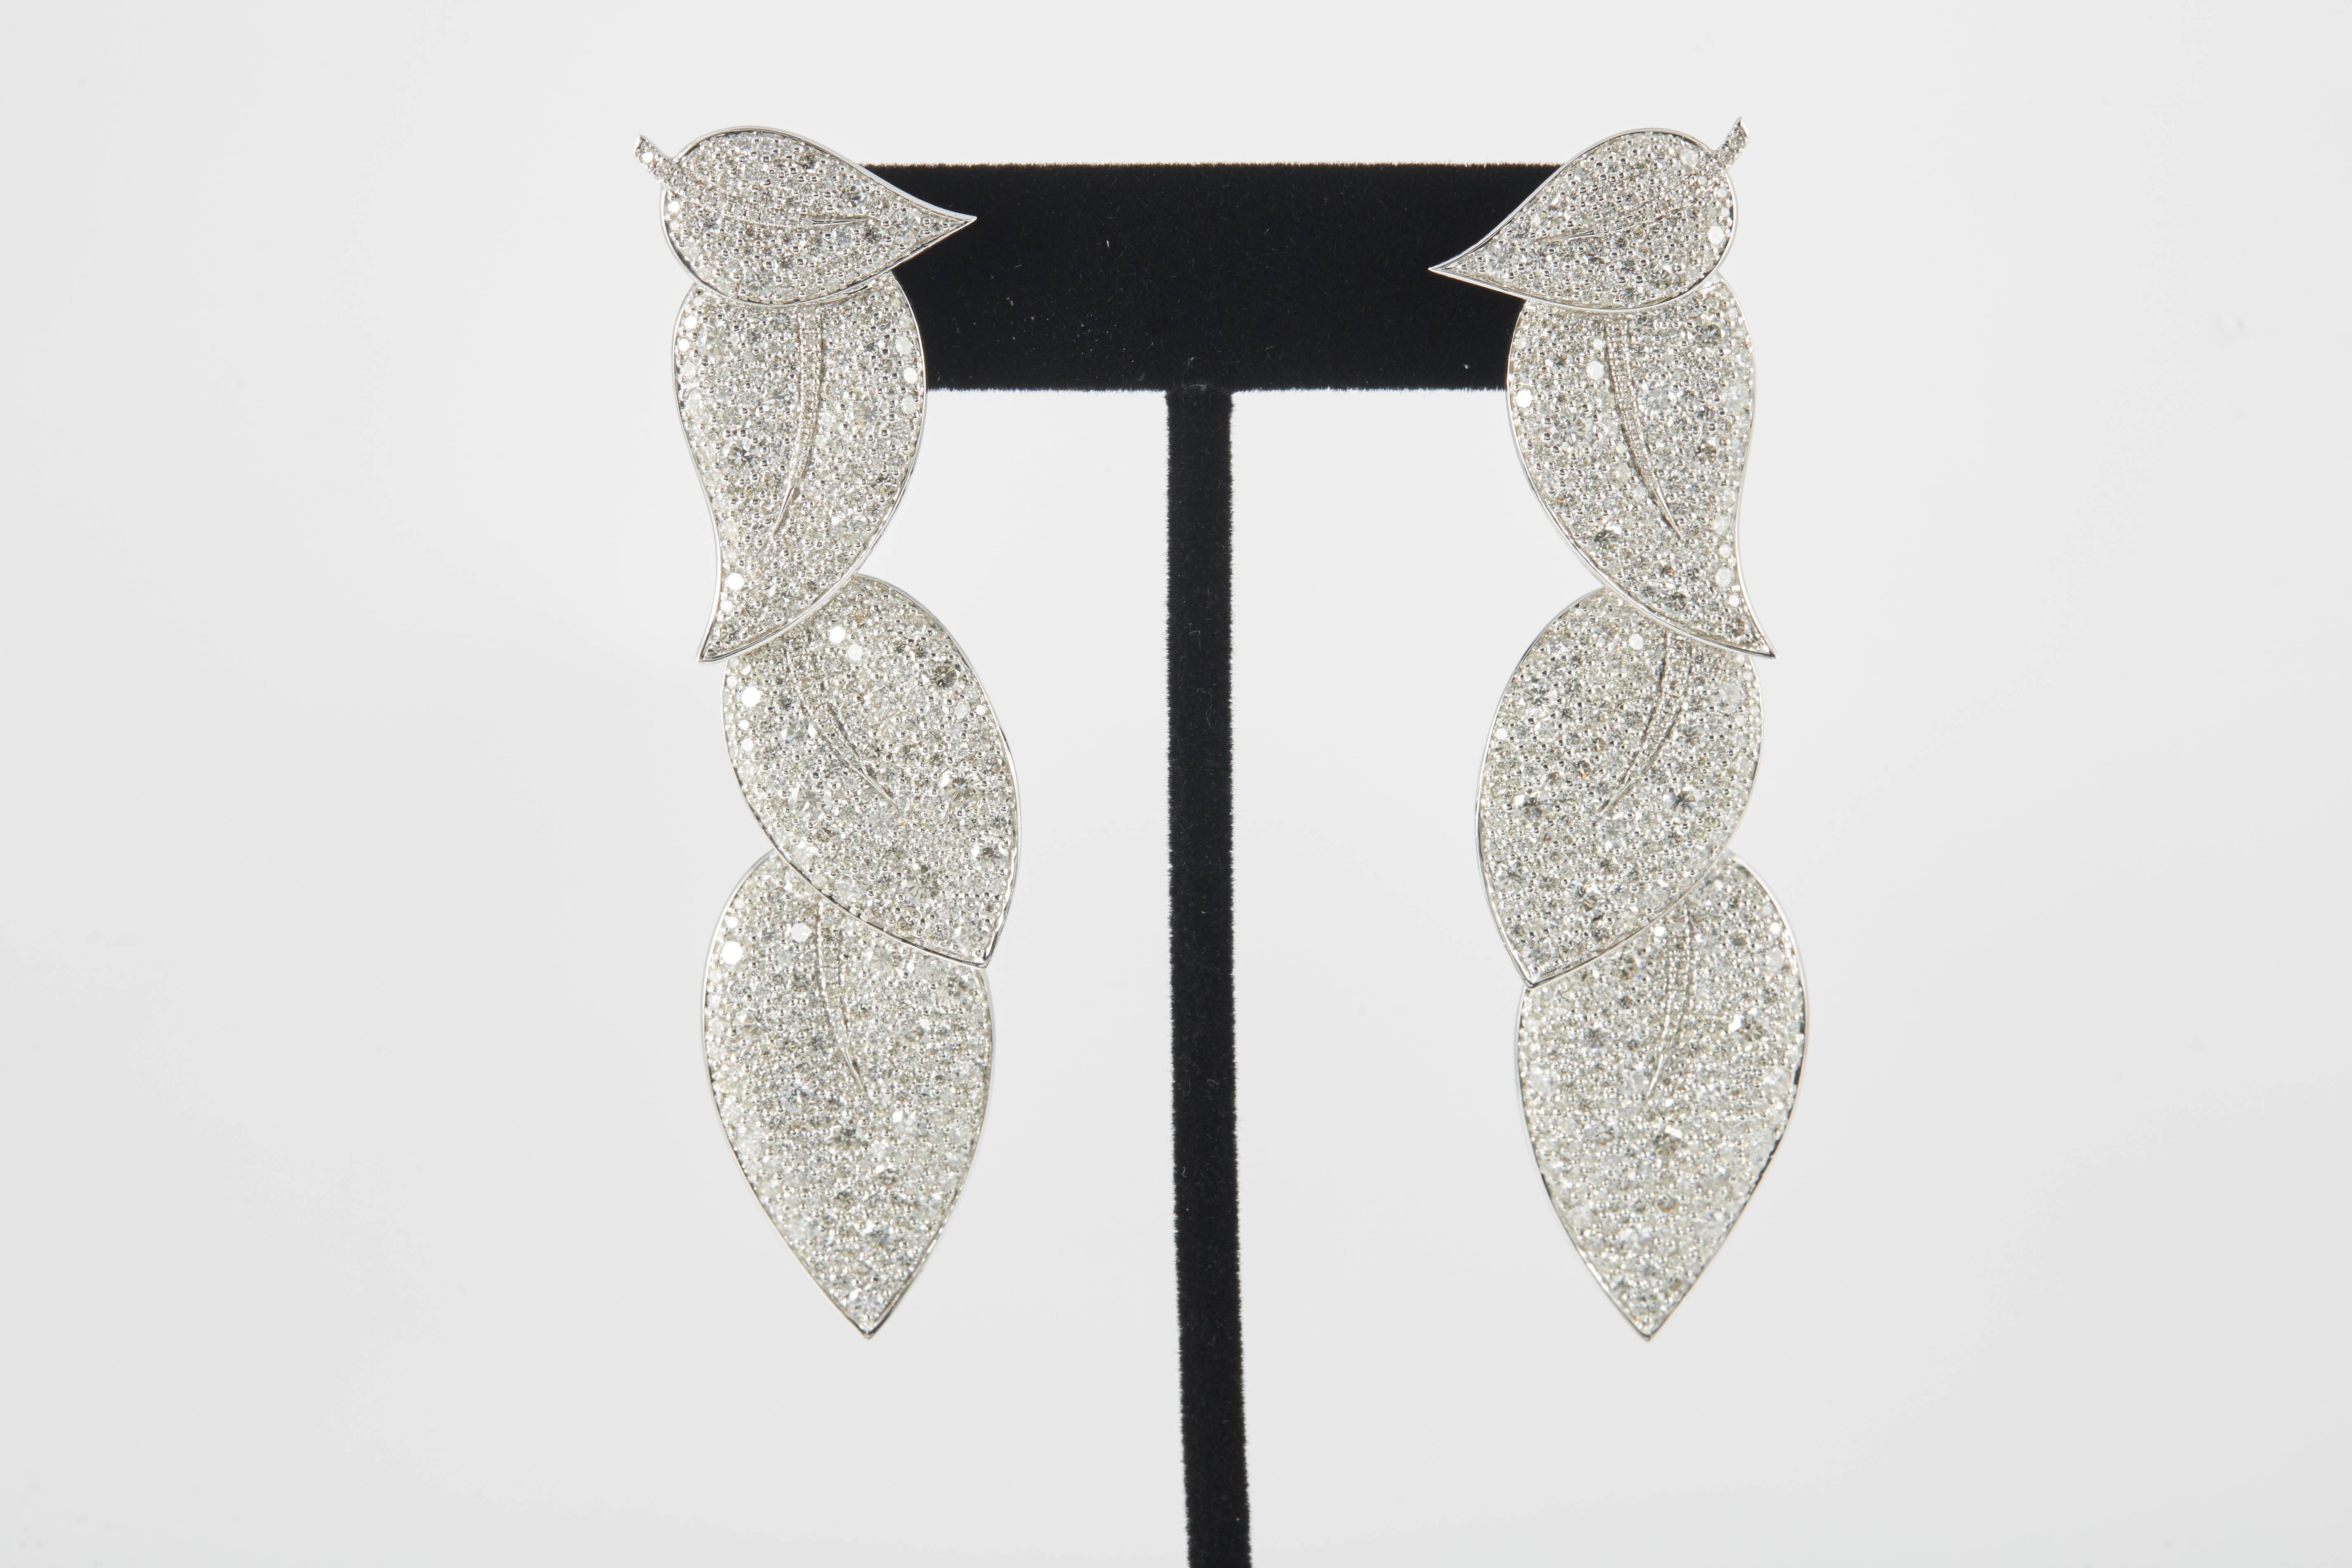 SAM.SAAB Leaf Motif 15.47ct white diamond cascading earring in 18k white gold. Approximately 3 inches long.